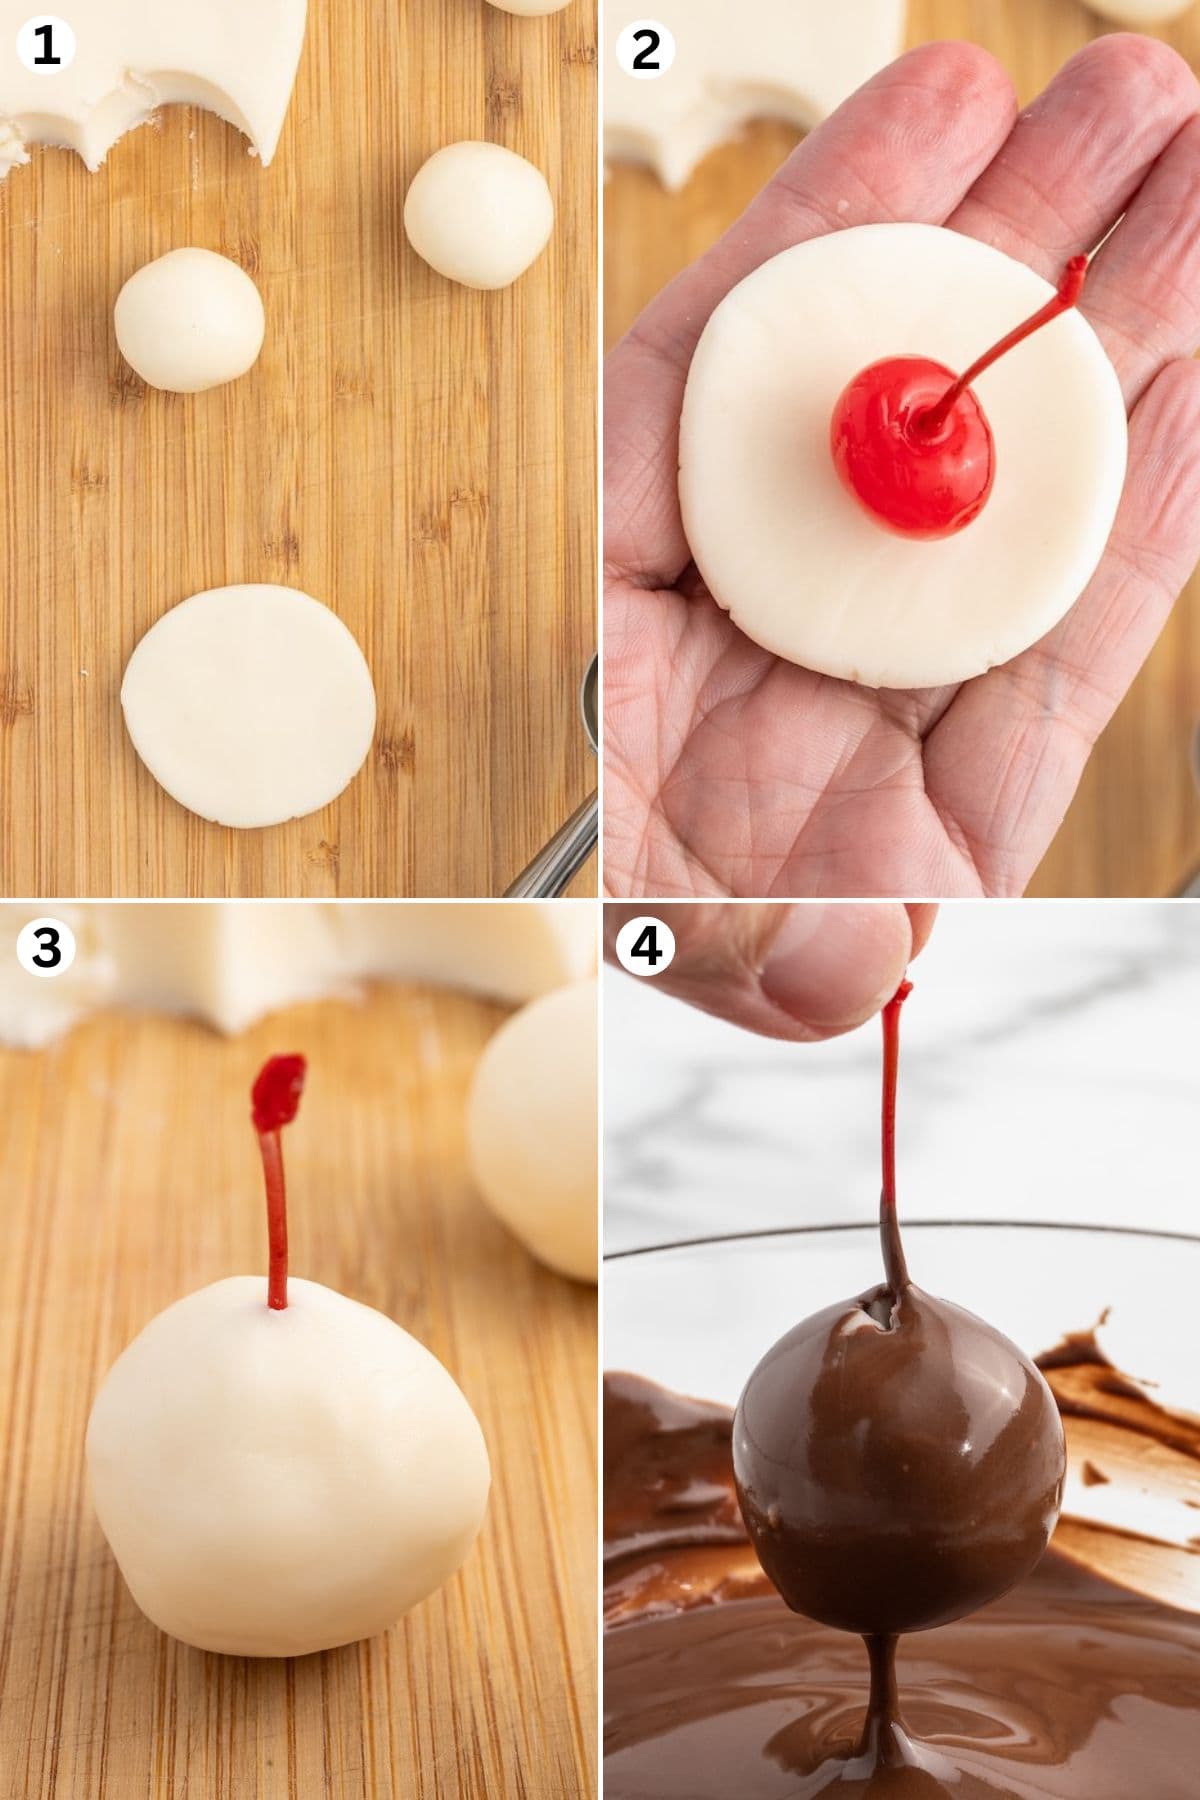 prepare the sugar paste. wrap around the cherries and dip in chocolate coating.